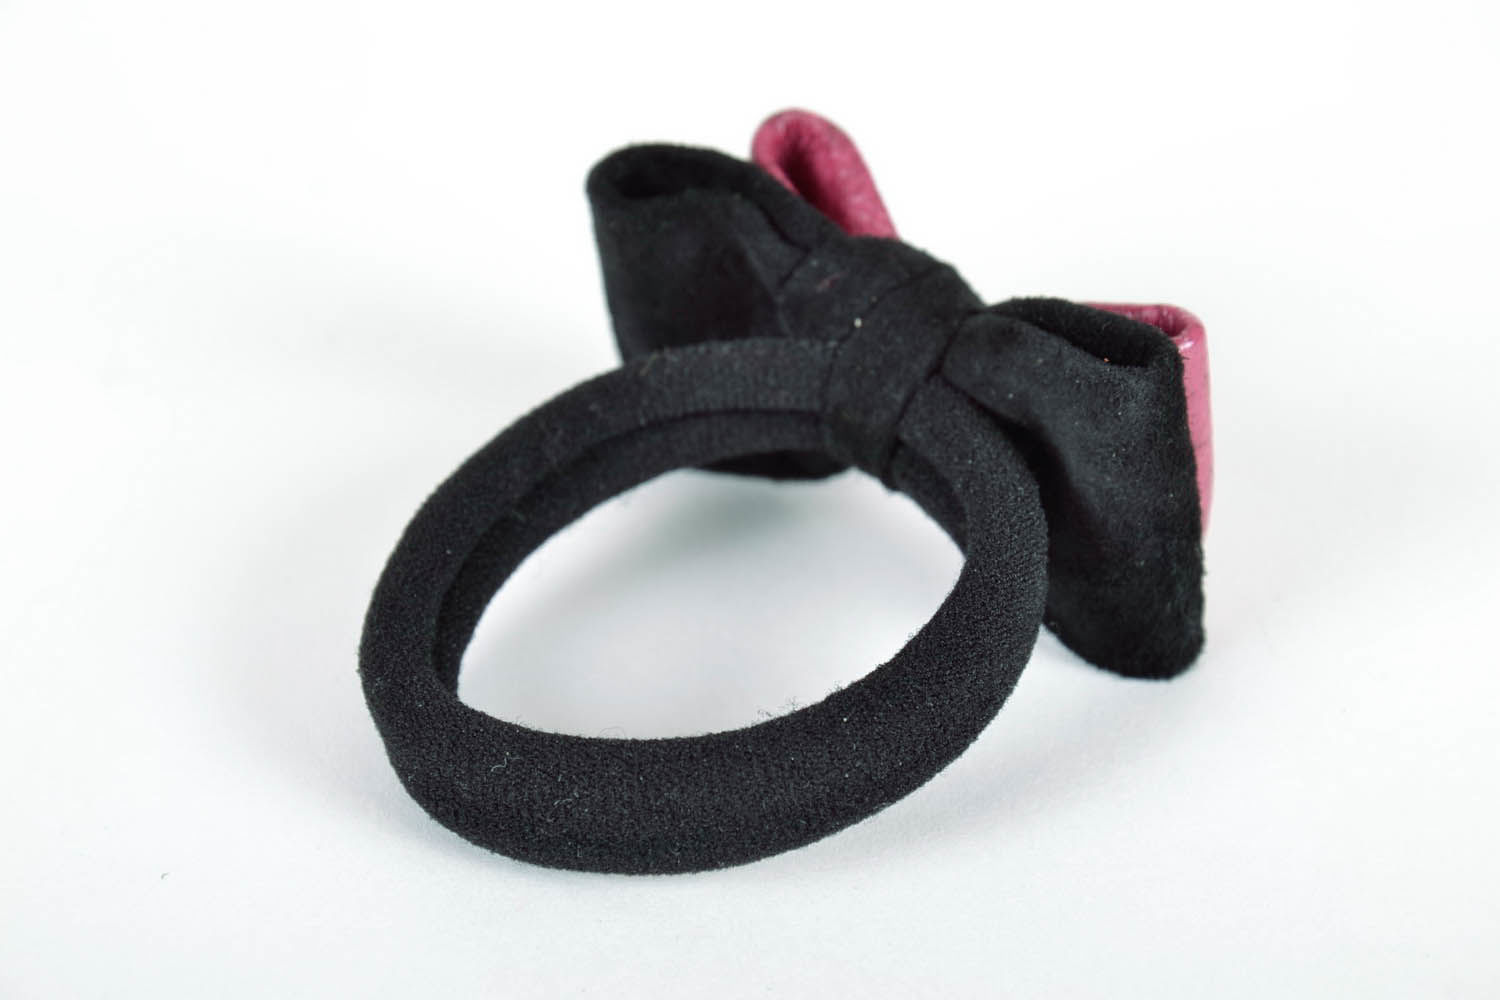 Hair tie made of leather photo 3